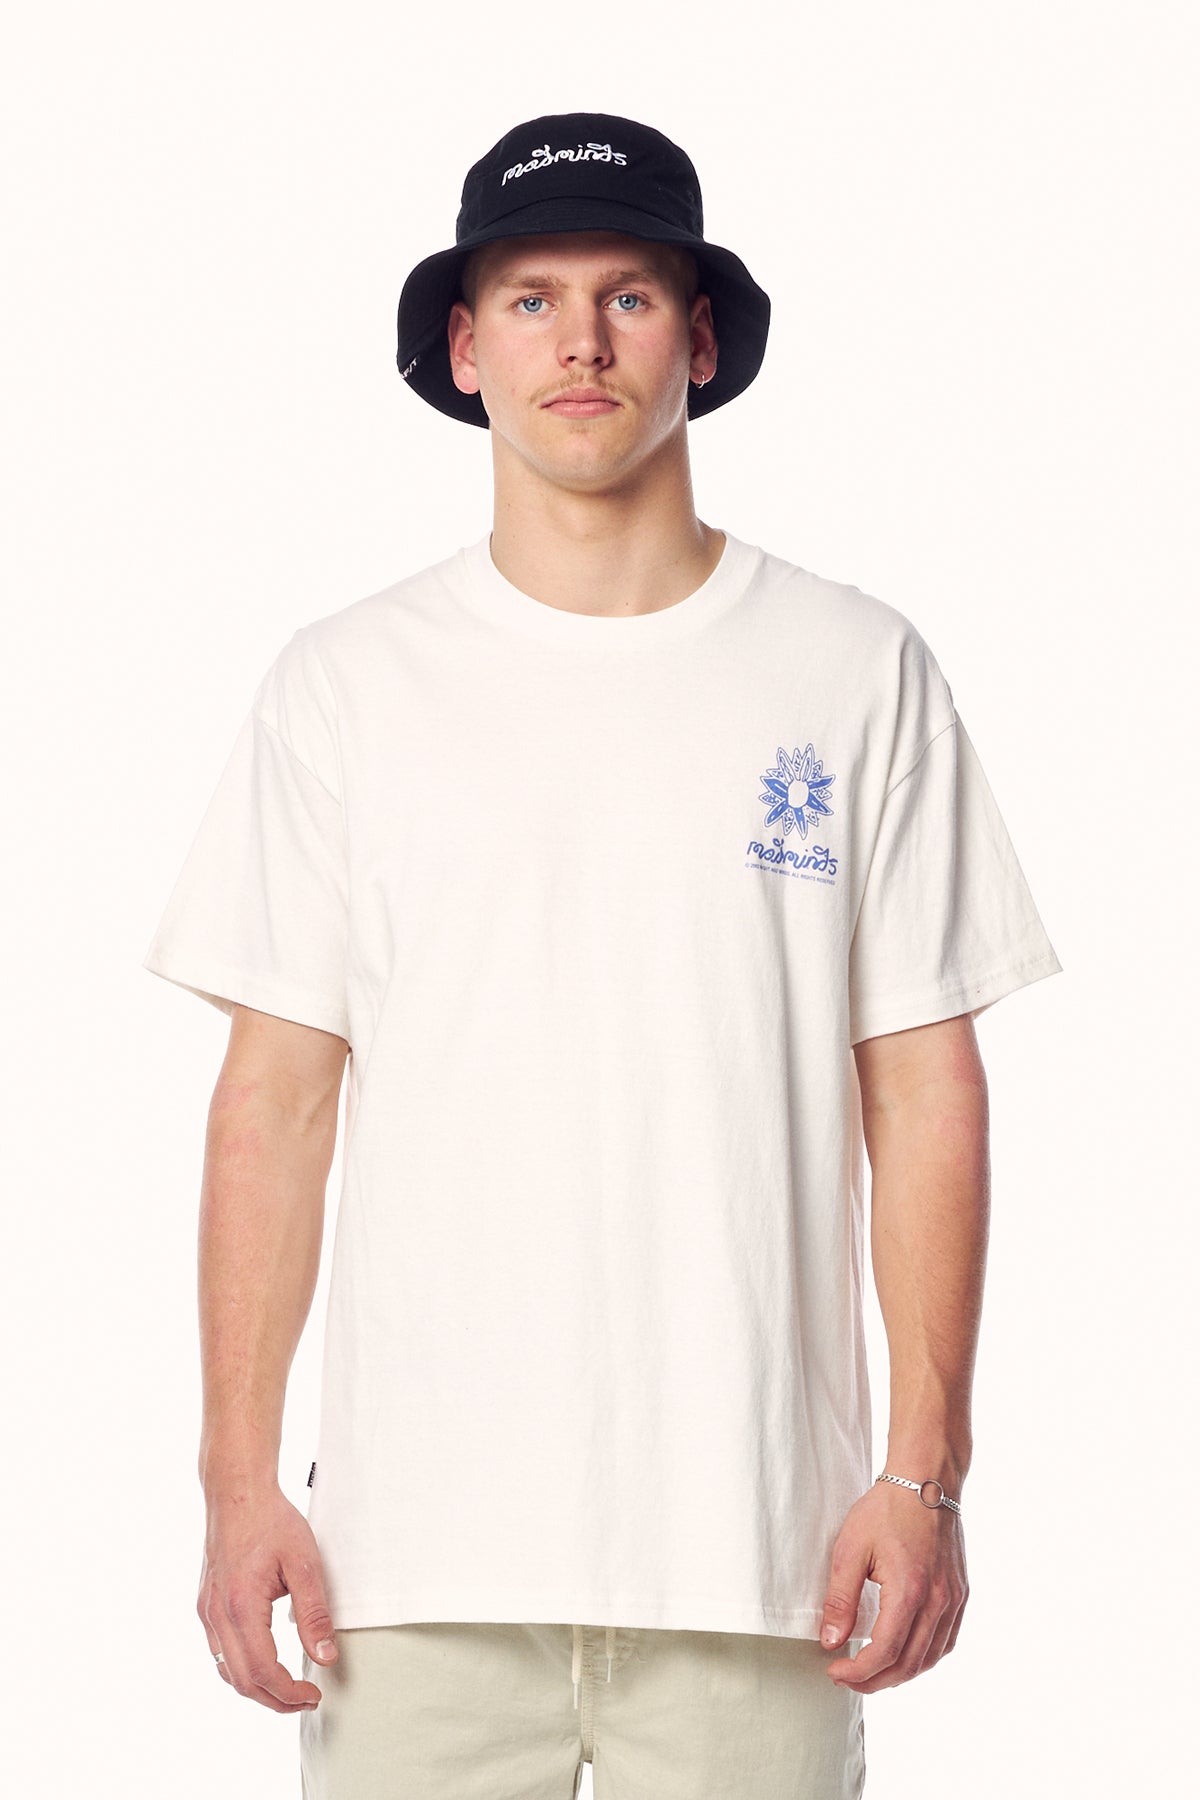 SATURN SATIN 50/50 SS TEE - WASHED WHITE